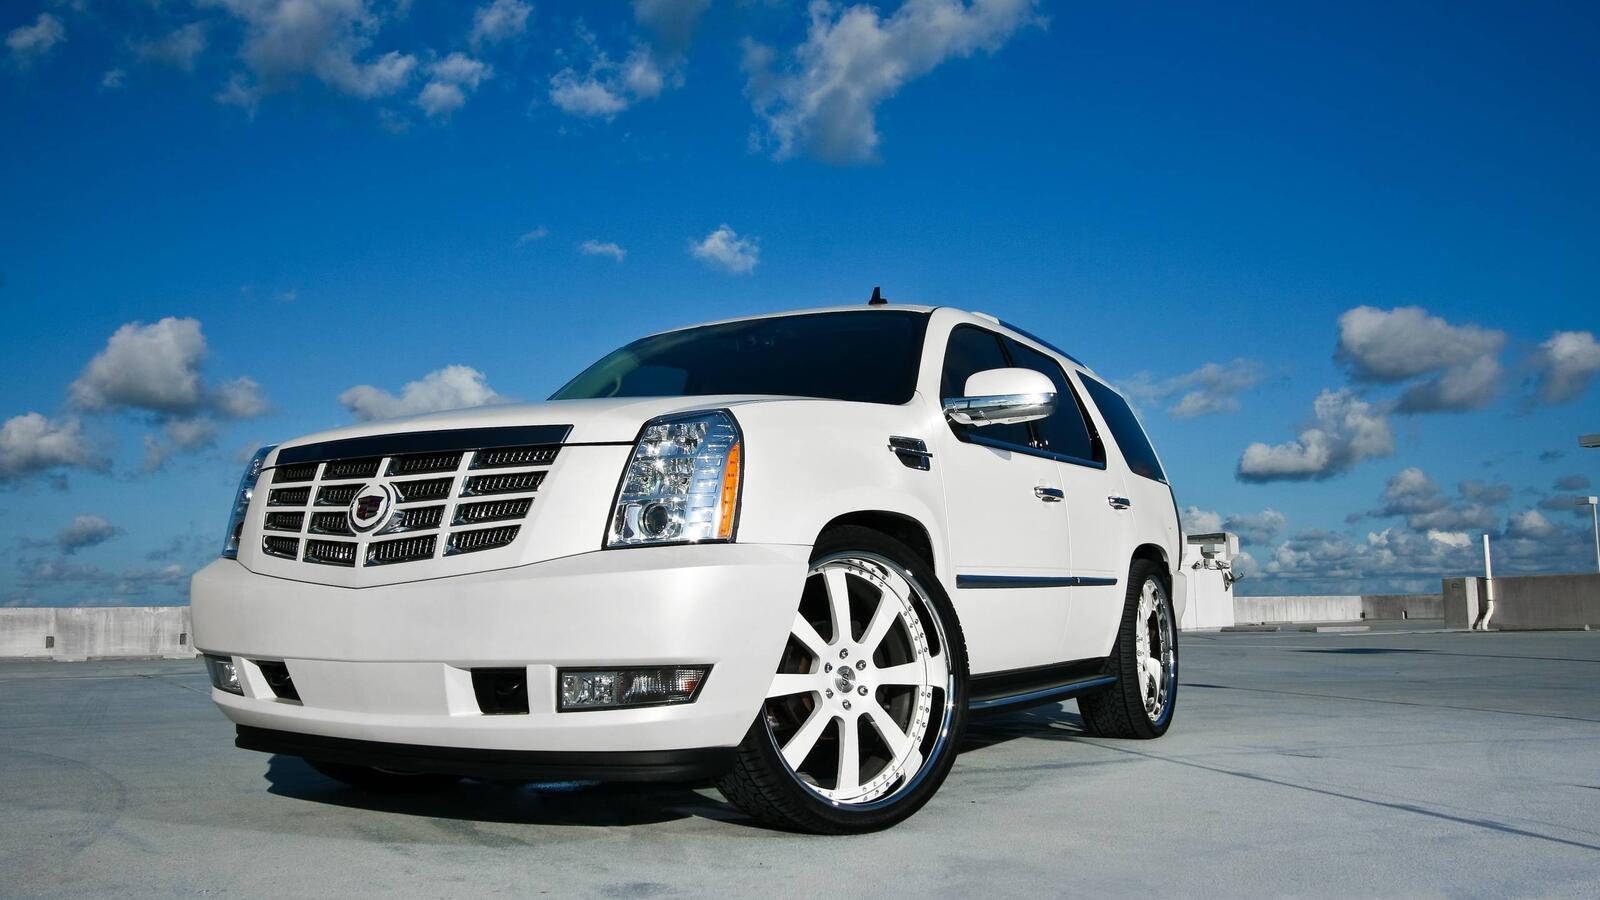 Wallpapers Cadillac escalade white toning on the desktop